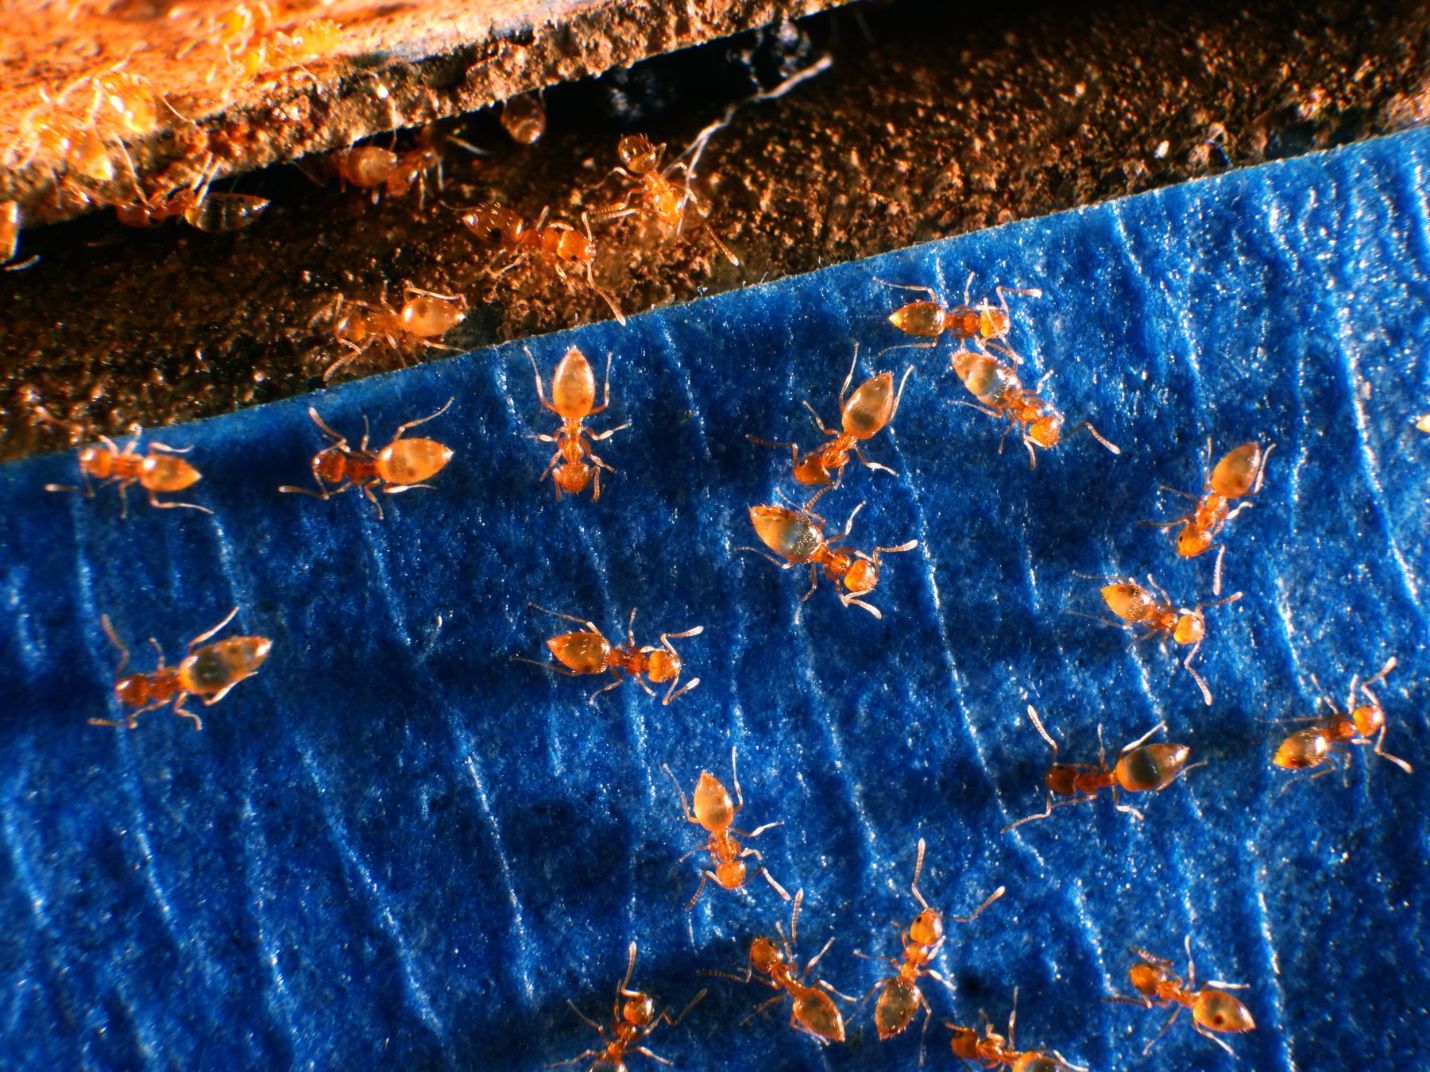 Infestation of Plagiolepis alluaudi Emery on a kitchen countertop (here, use of blue tape for subsequent bait application, see Figure 7). 